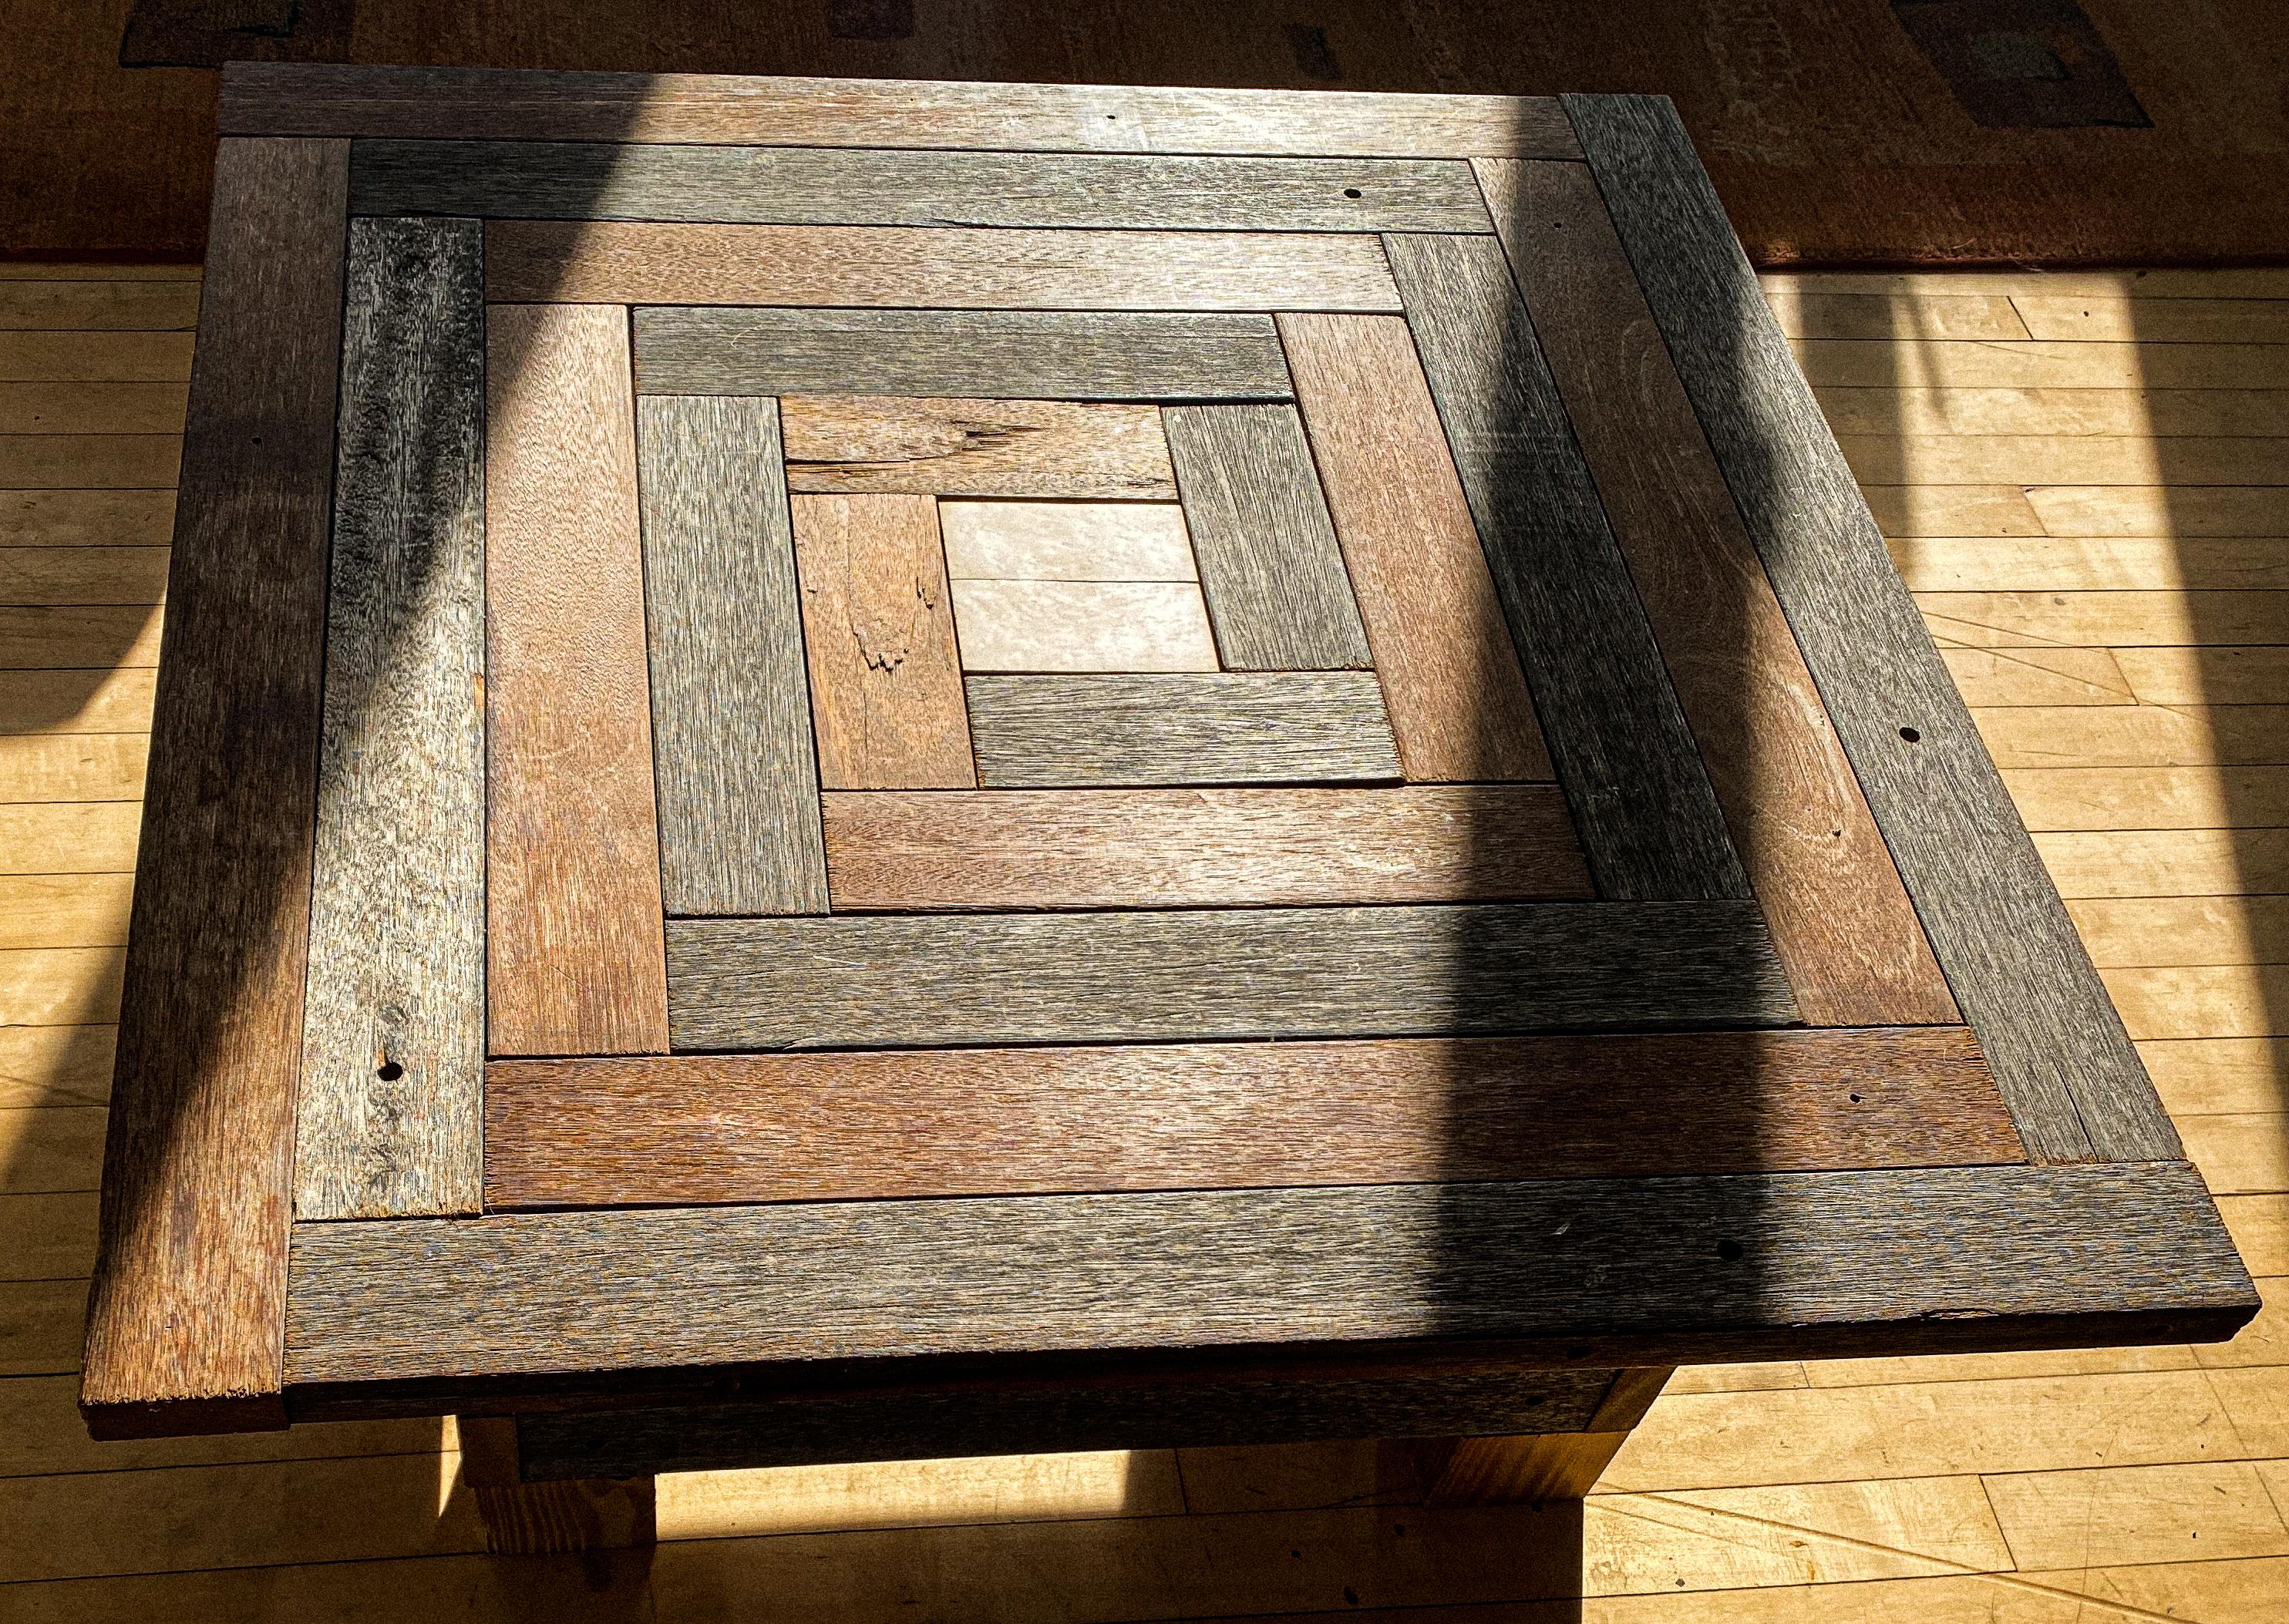 The coffee puzzle table in a labyrinth pattern consisting of mix of weathered and new hardwood strips with a bird’s-eye maple center square.
It's the perfect Arts & Crafts rustic coffee table. A conversation piece in any room.